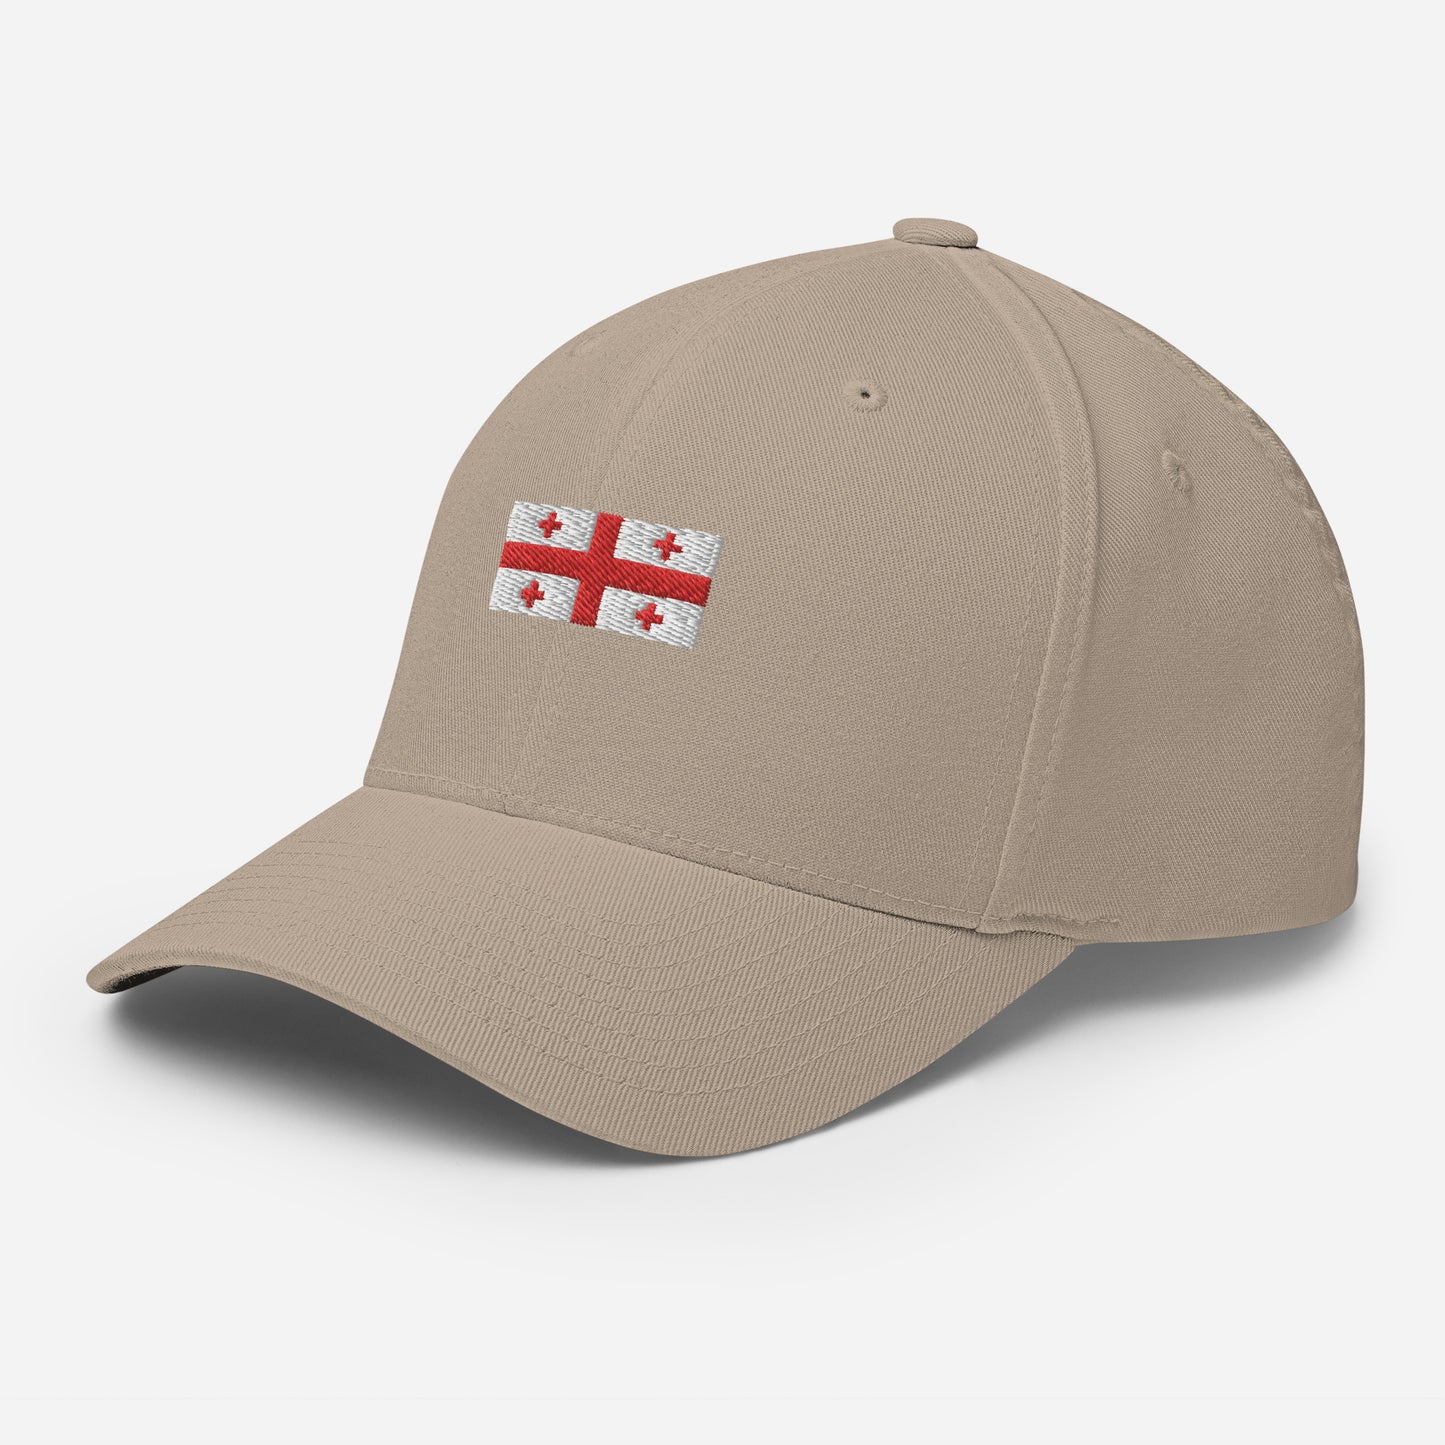 cap-from-the-front-with-georgian-flag